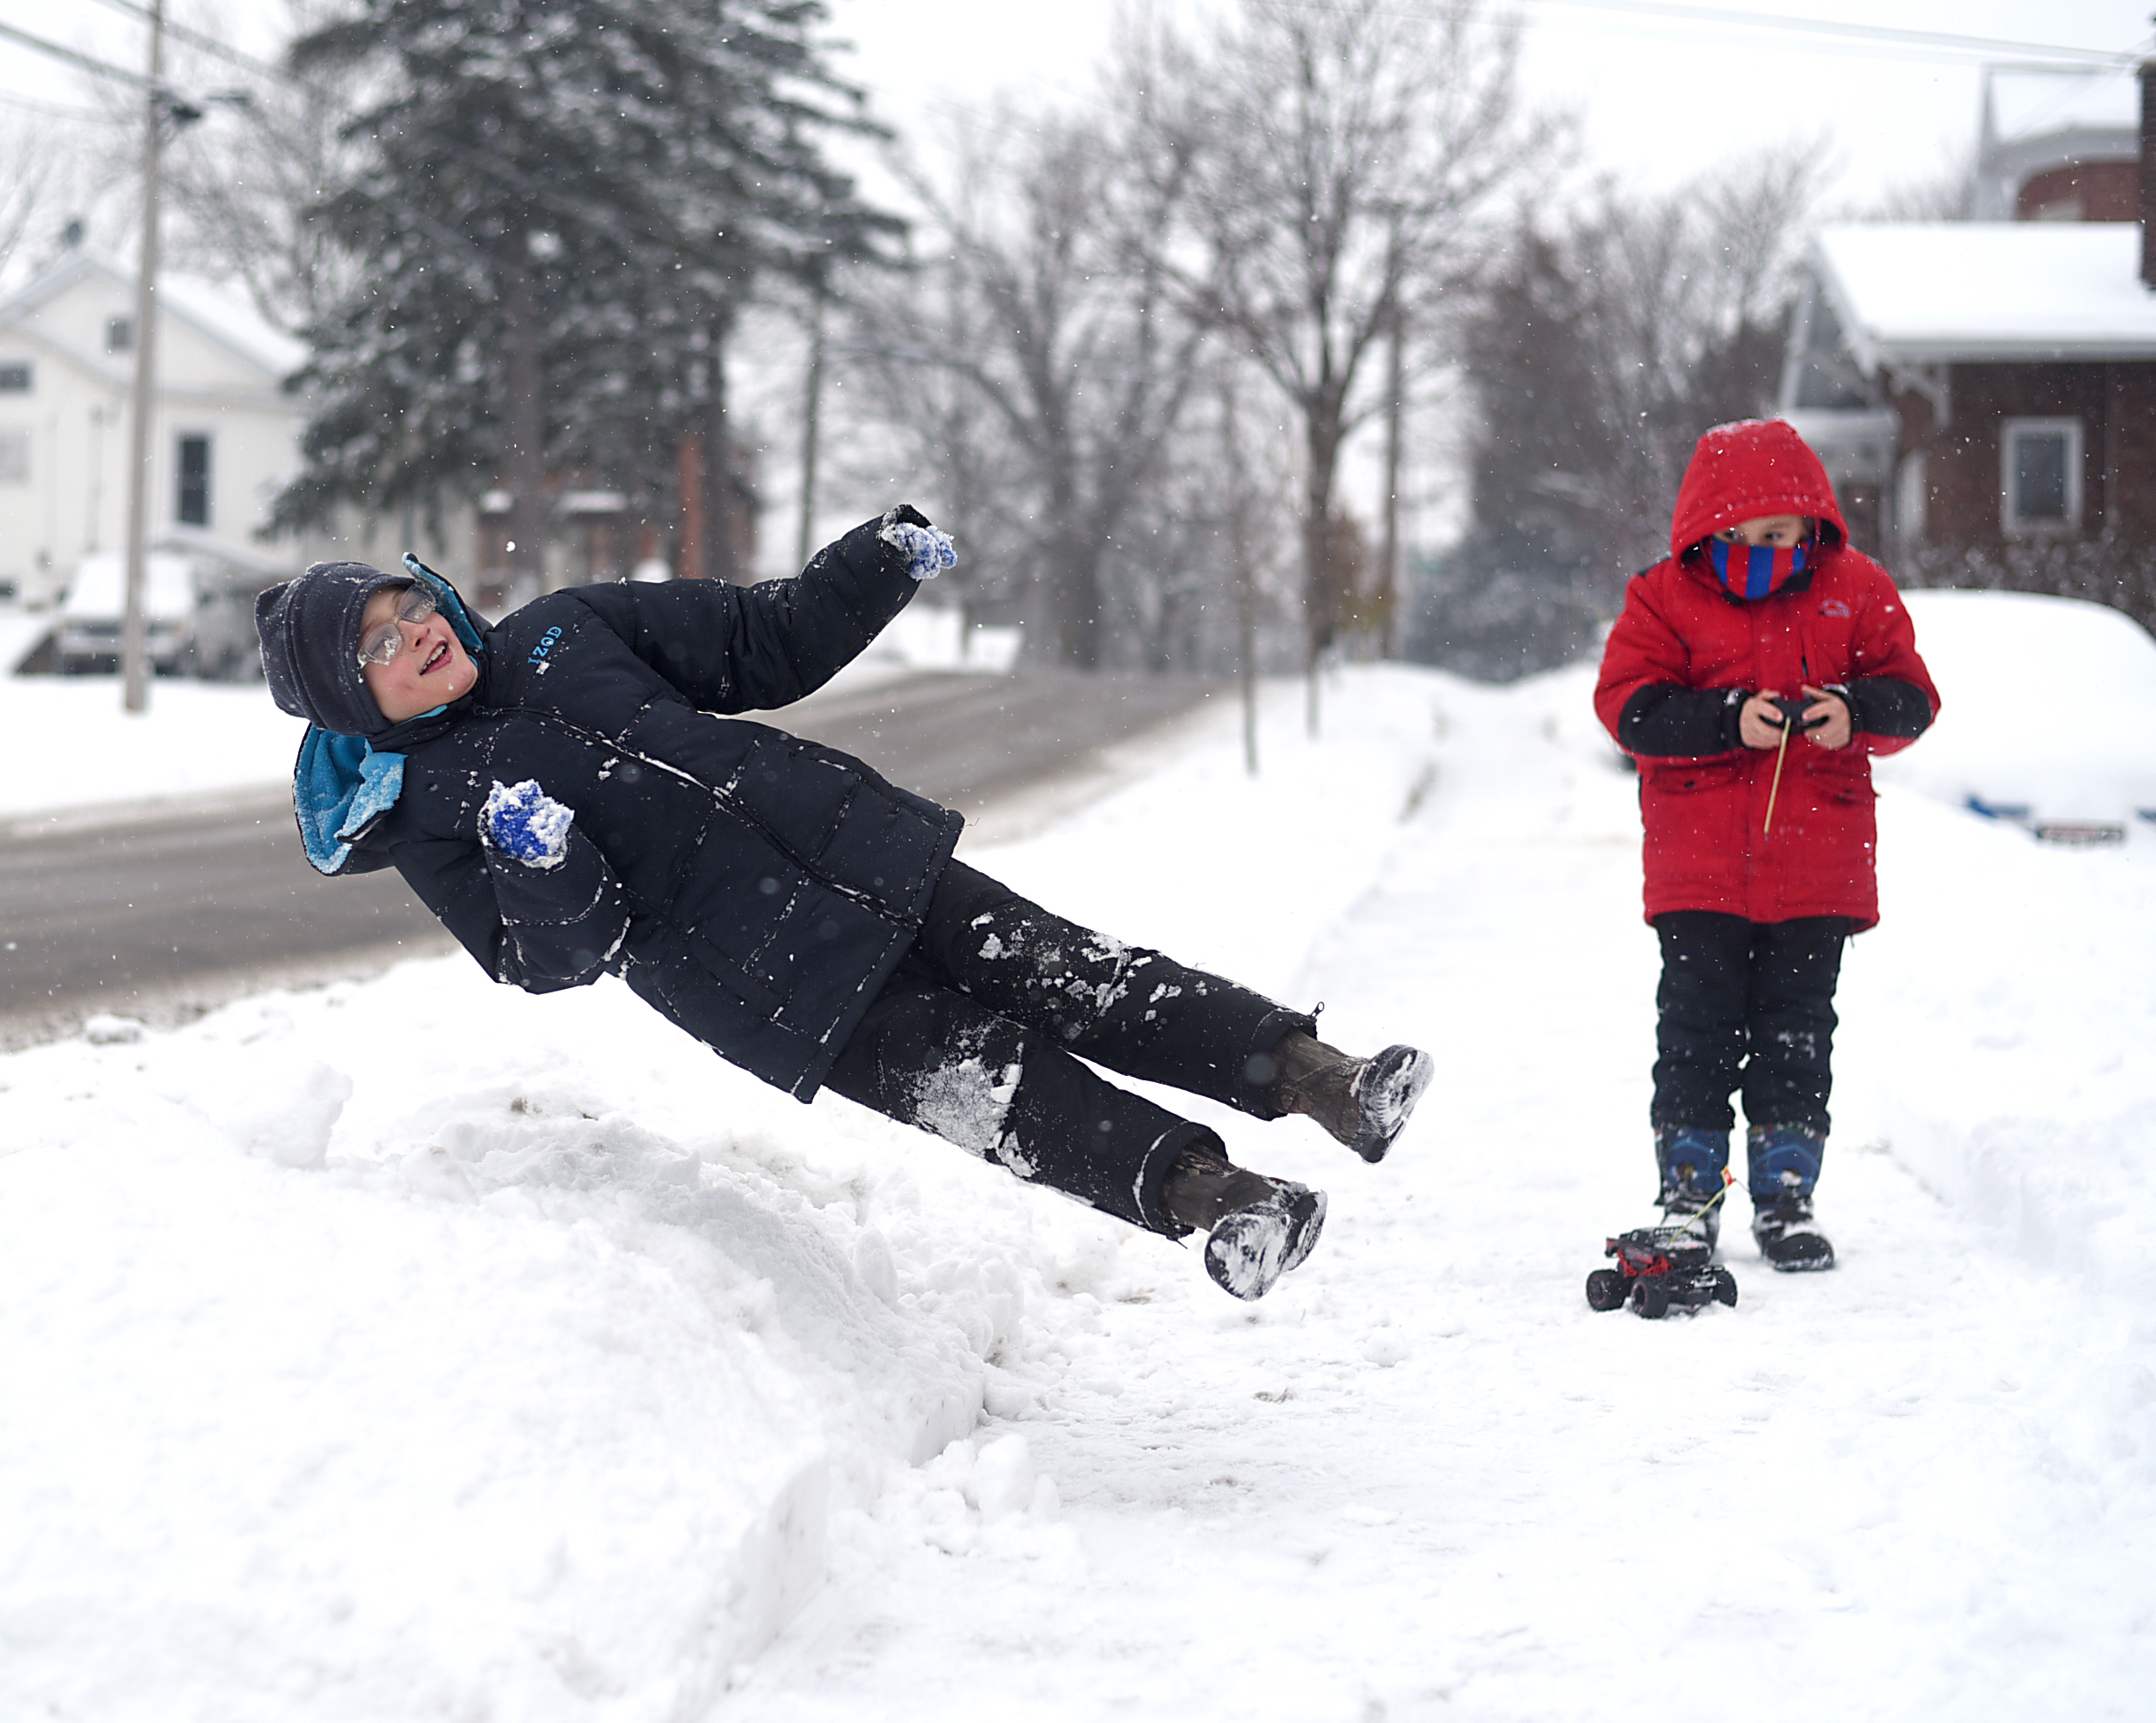  Malaki Cooter, 9, jumps into a pile of snow while his brother, Kayden Cooter, 6, tries to drive a remote controlled car on the sidewalk outside their home in Monroe Dec. 11, 2016. The brothers were enjoying the snow and made several snow angels. 